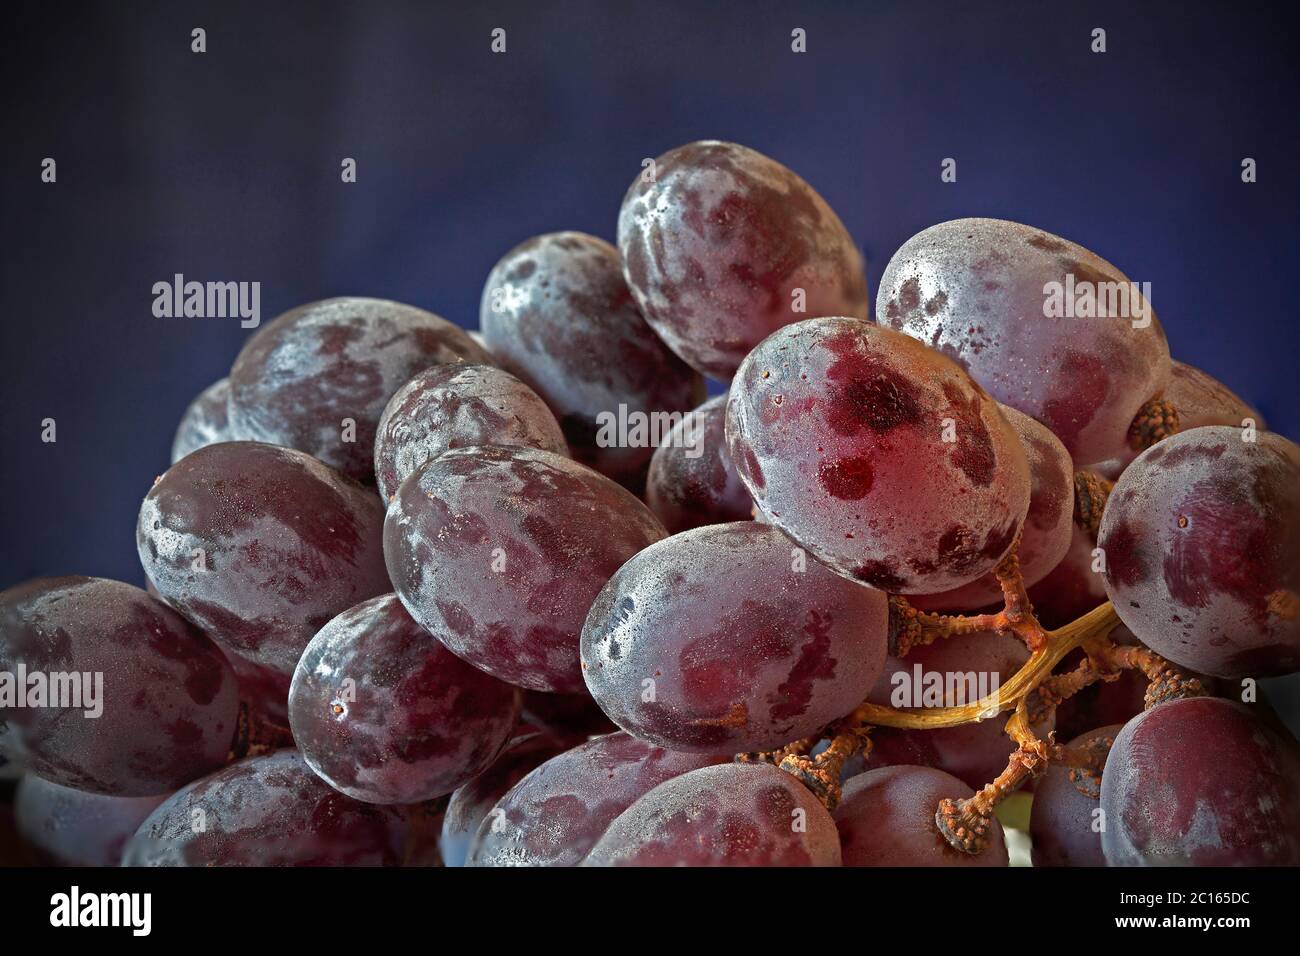 Red grapes on the vine covered in bloom Stock Photo